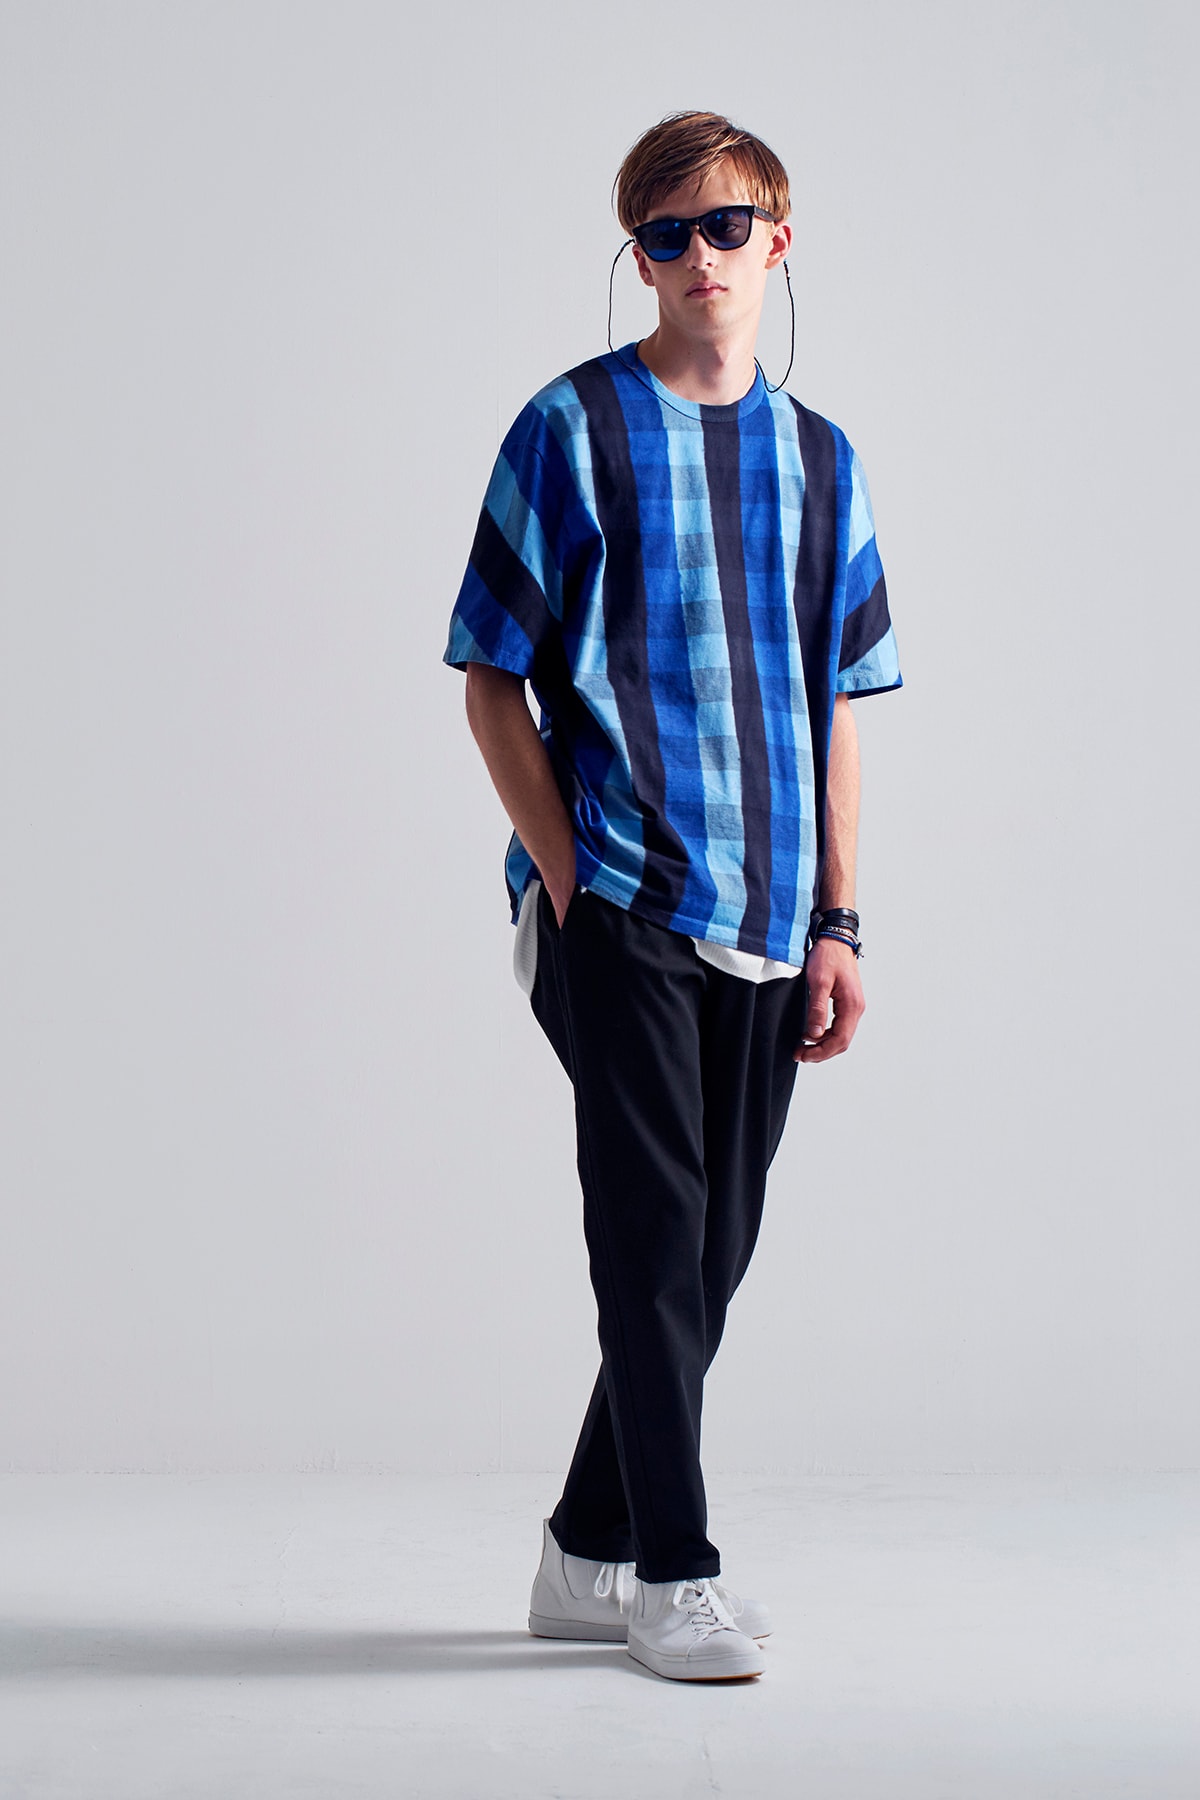 Curly co spring summer 2019 collection lookbook japan tokyo the weft